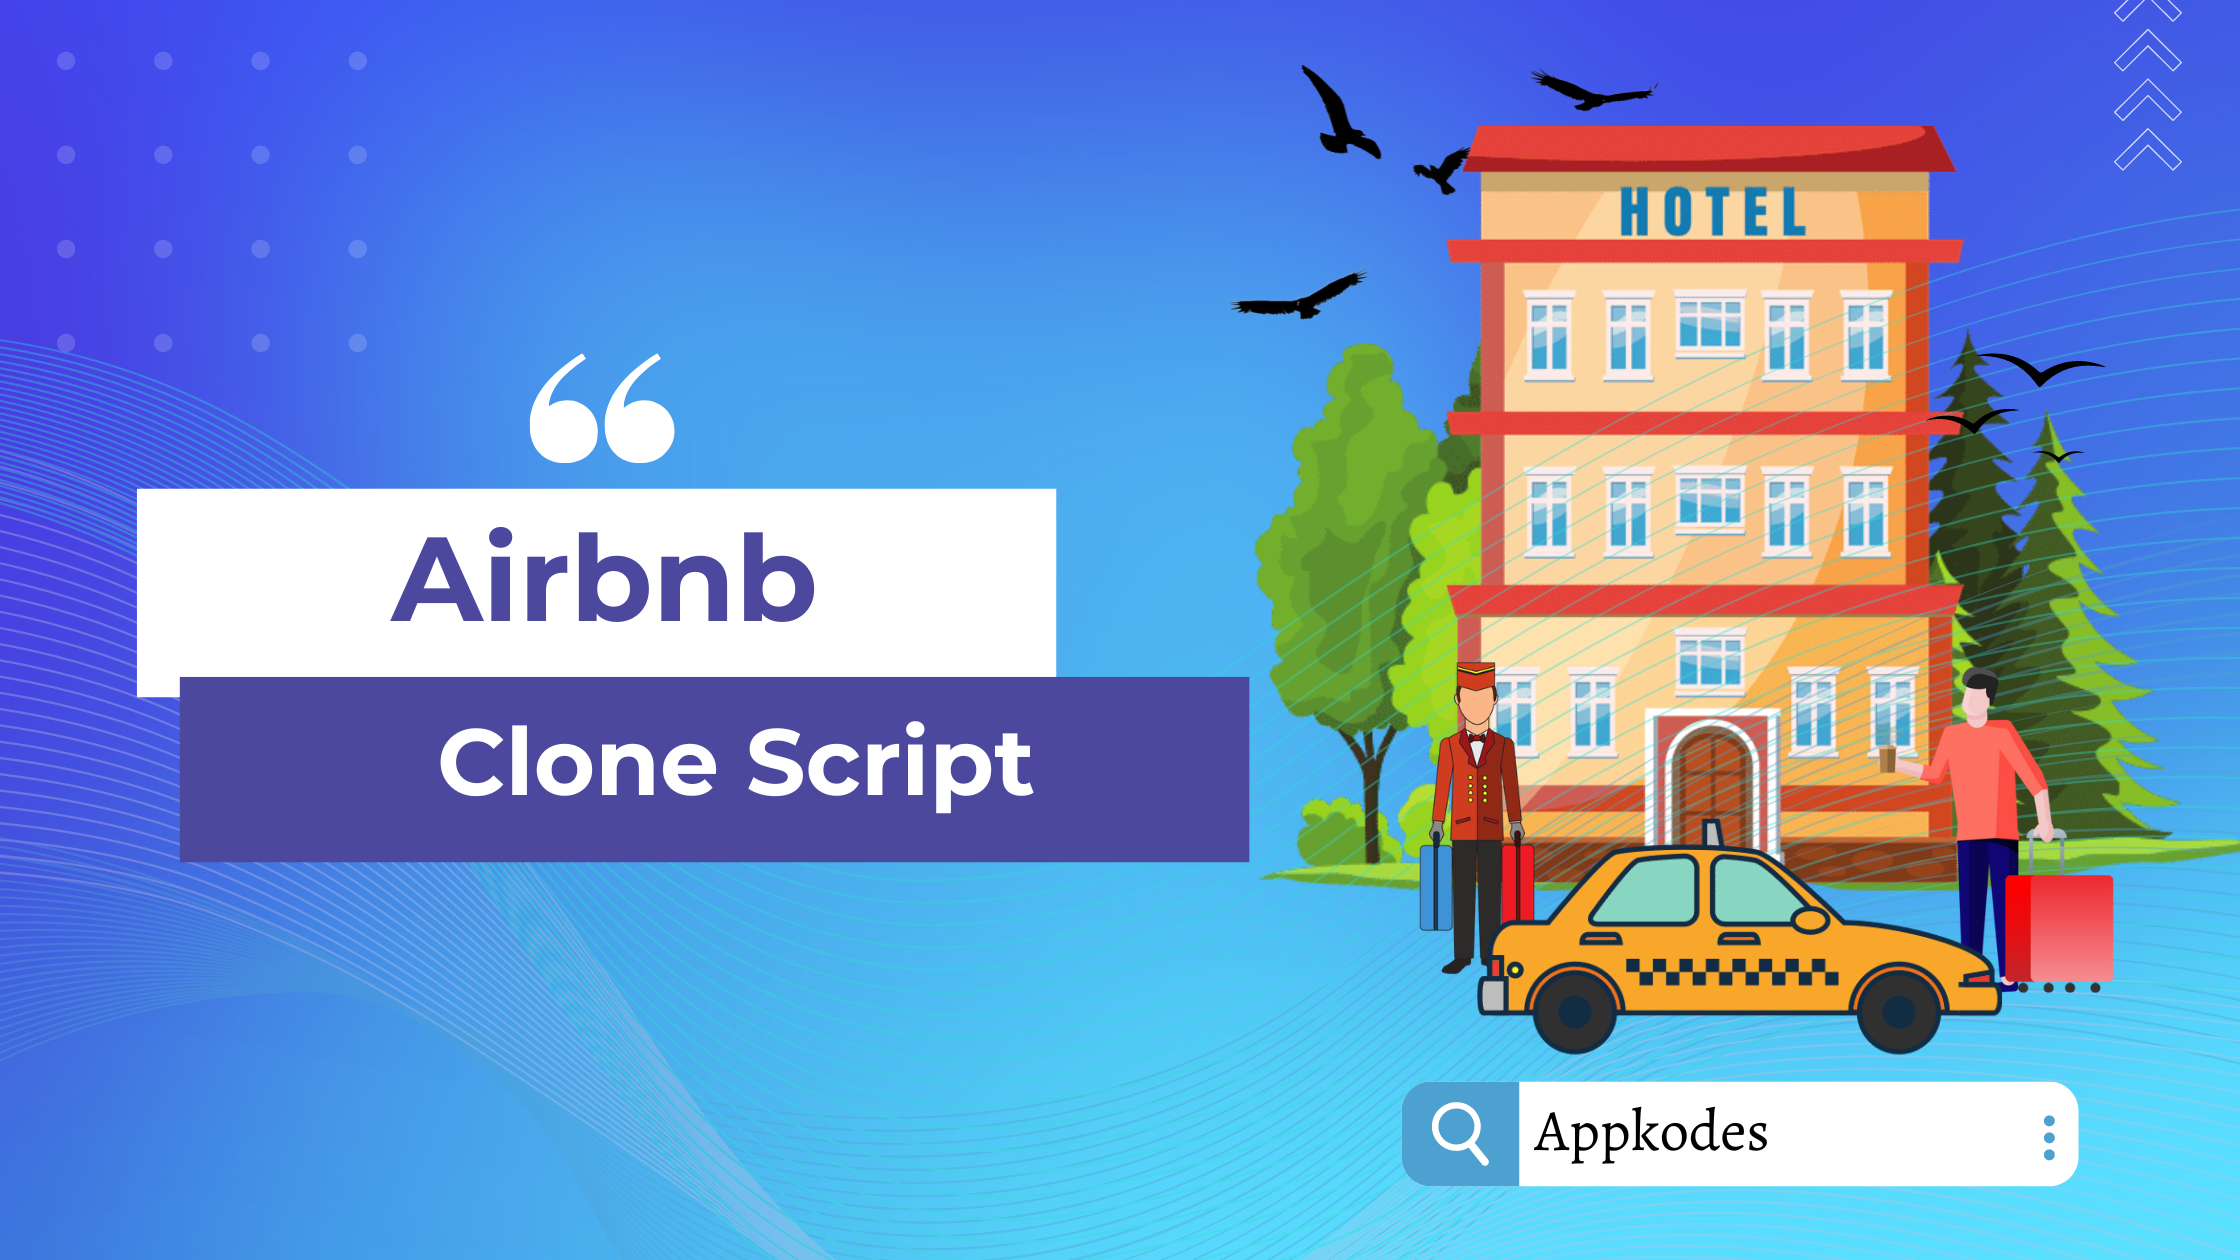 A complete understanding of building an Airbnb clone app